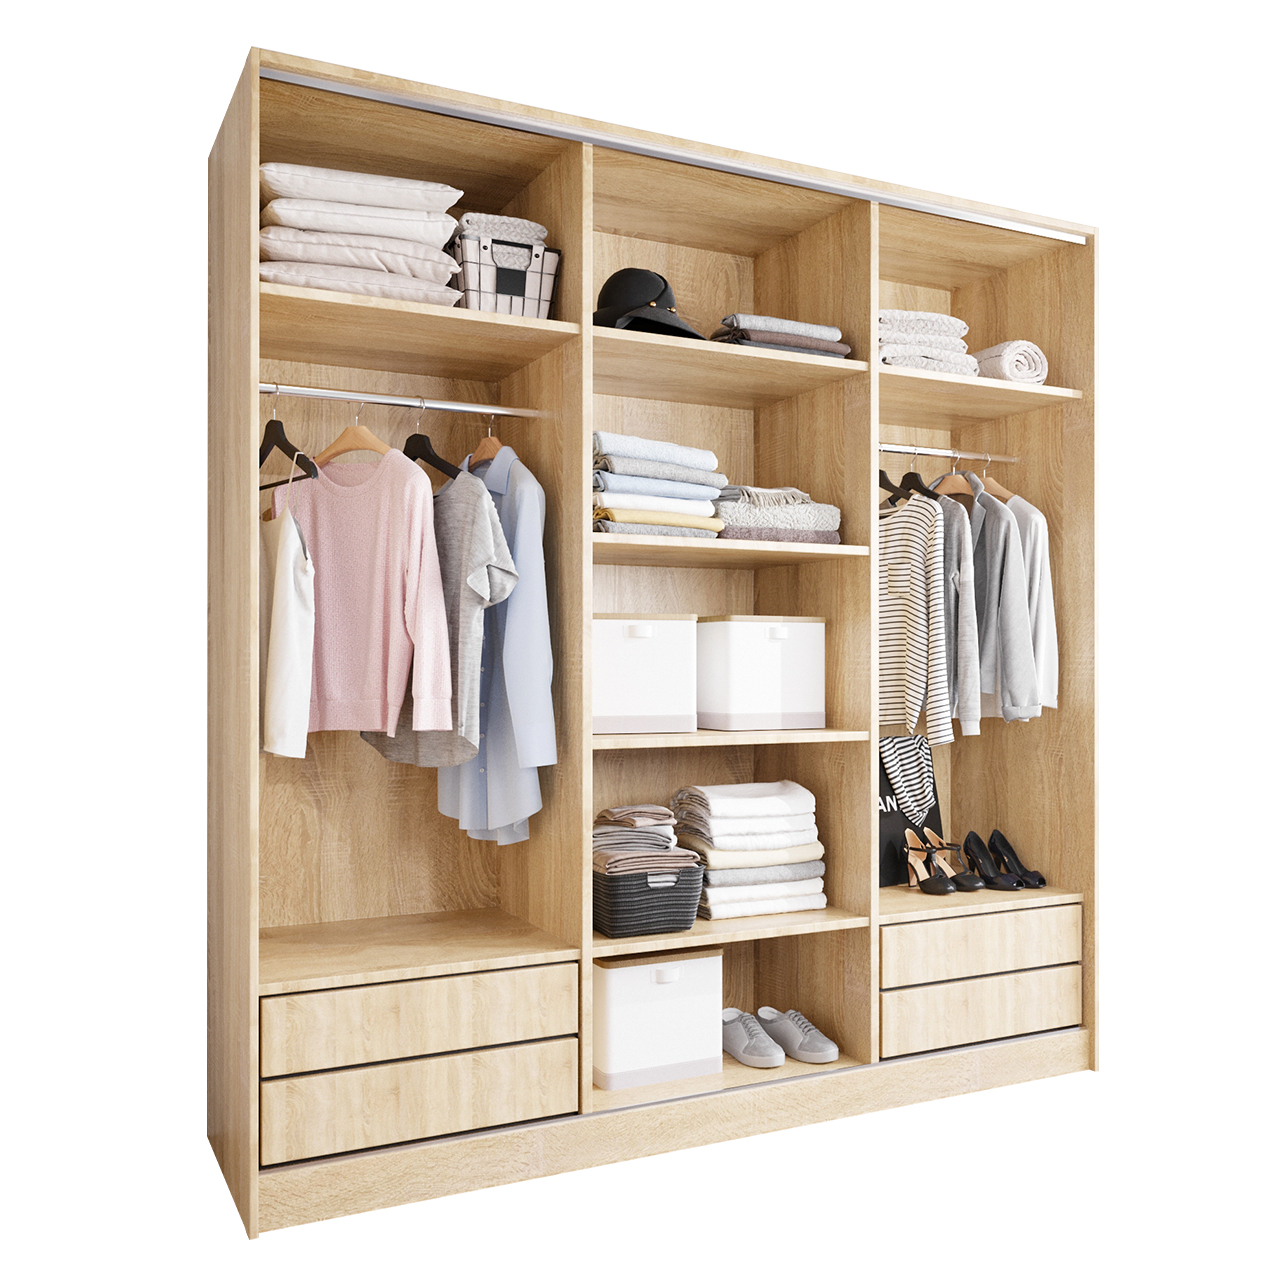 Sliding Wardrobe with Mirror and Drawers GRANO D 180 sonoma